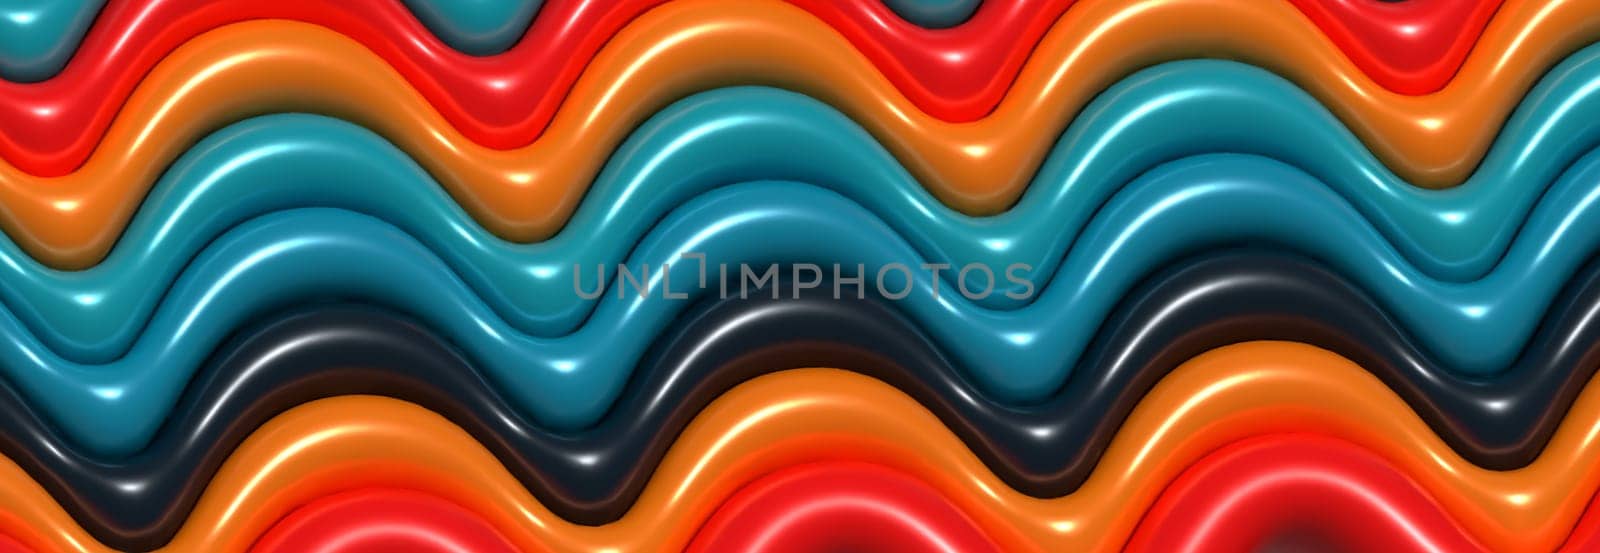 Abstract background with various inflated figures, 3D rendering illustration by ndanko